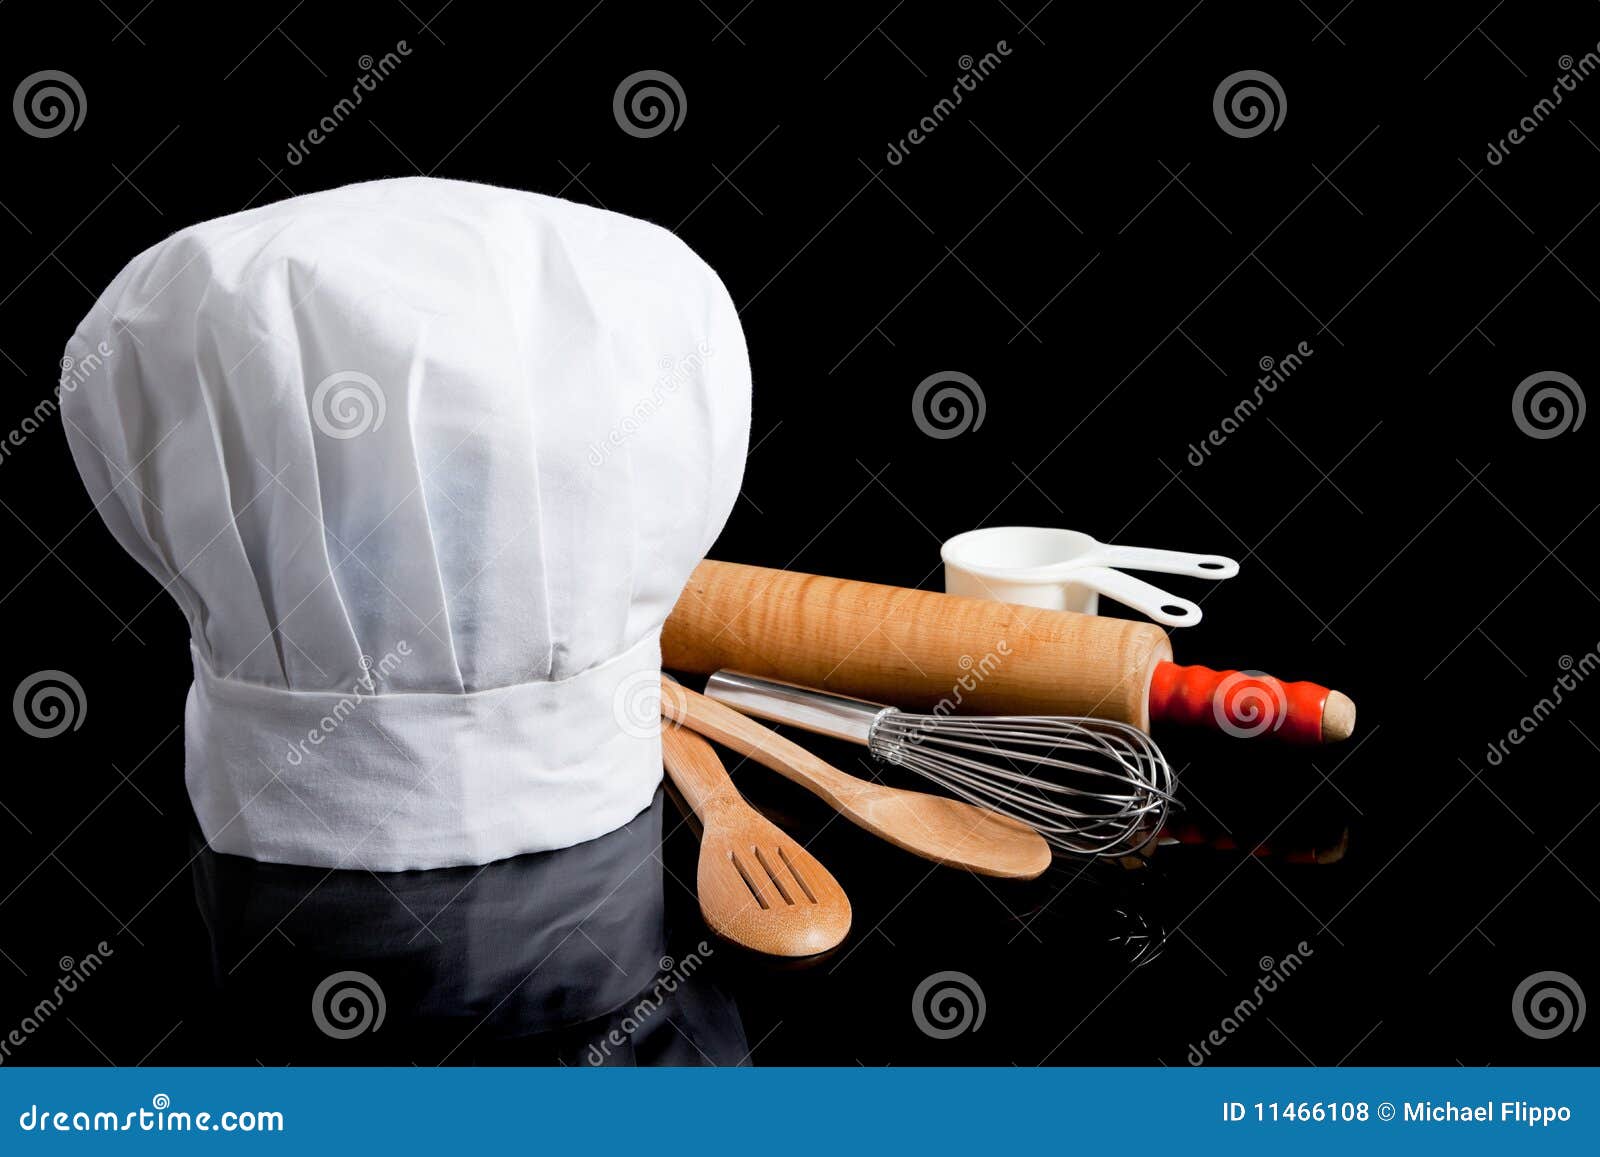 a chef's toque with cooking utensils